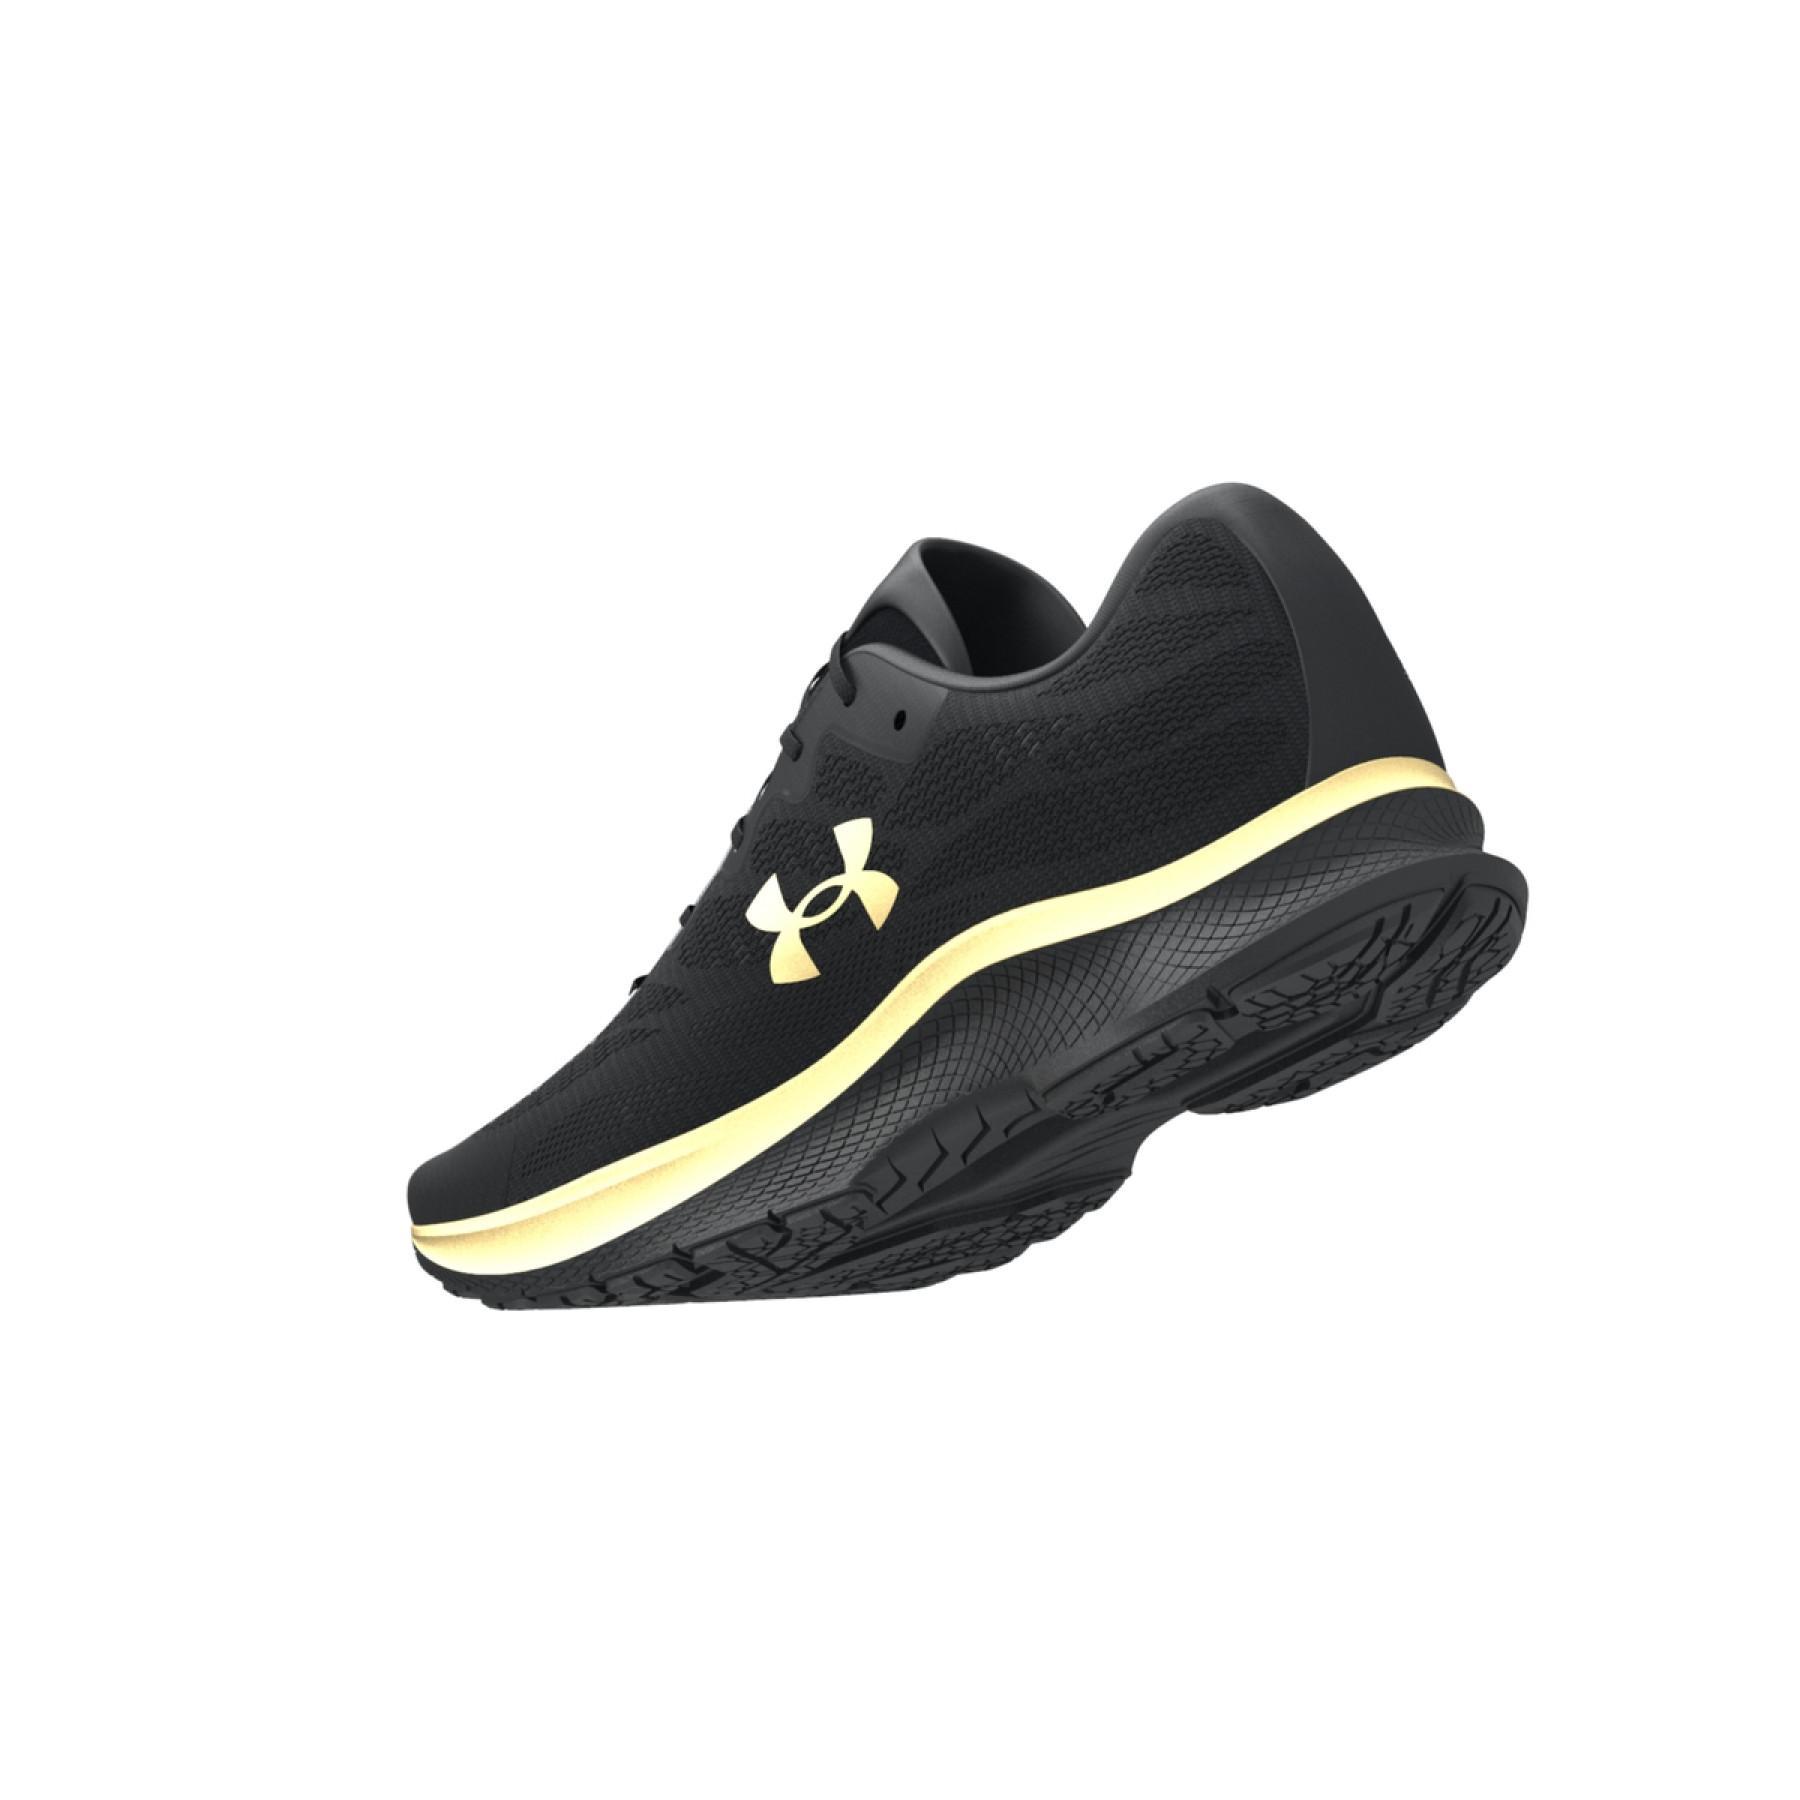 Laufschuhe Under Armour Charged Bandit 6